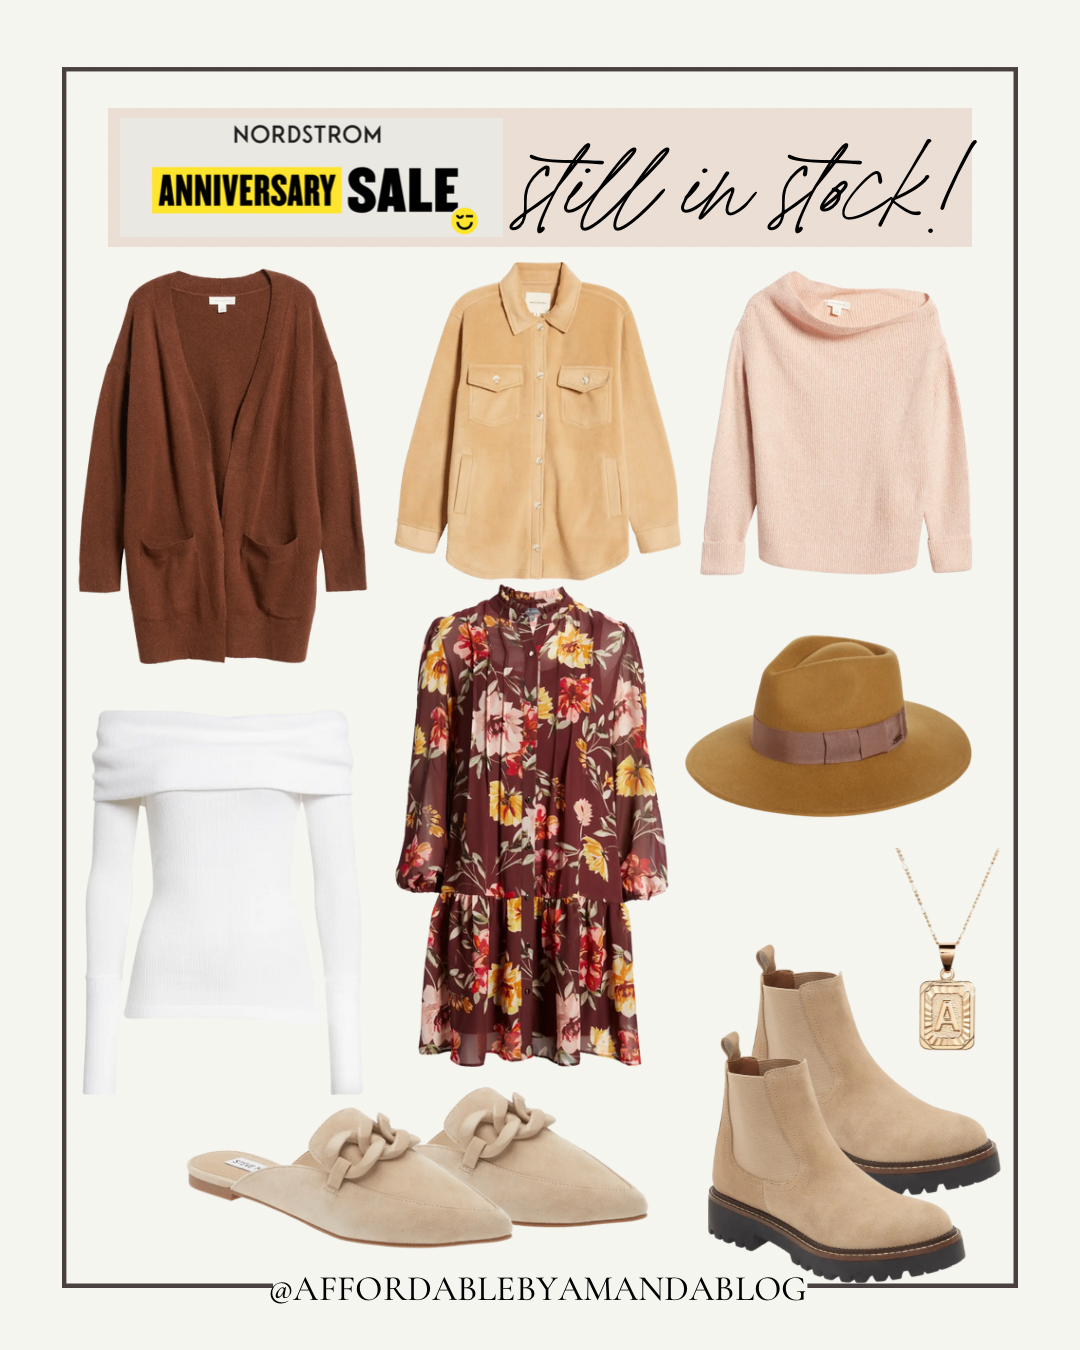 The Best Fall Finds from the Nordstrom Anniversary Sale 2022- Affordable by Amanda